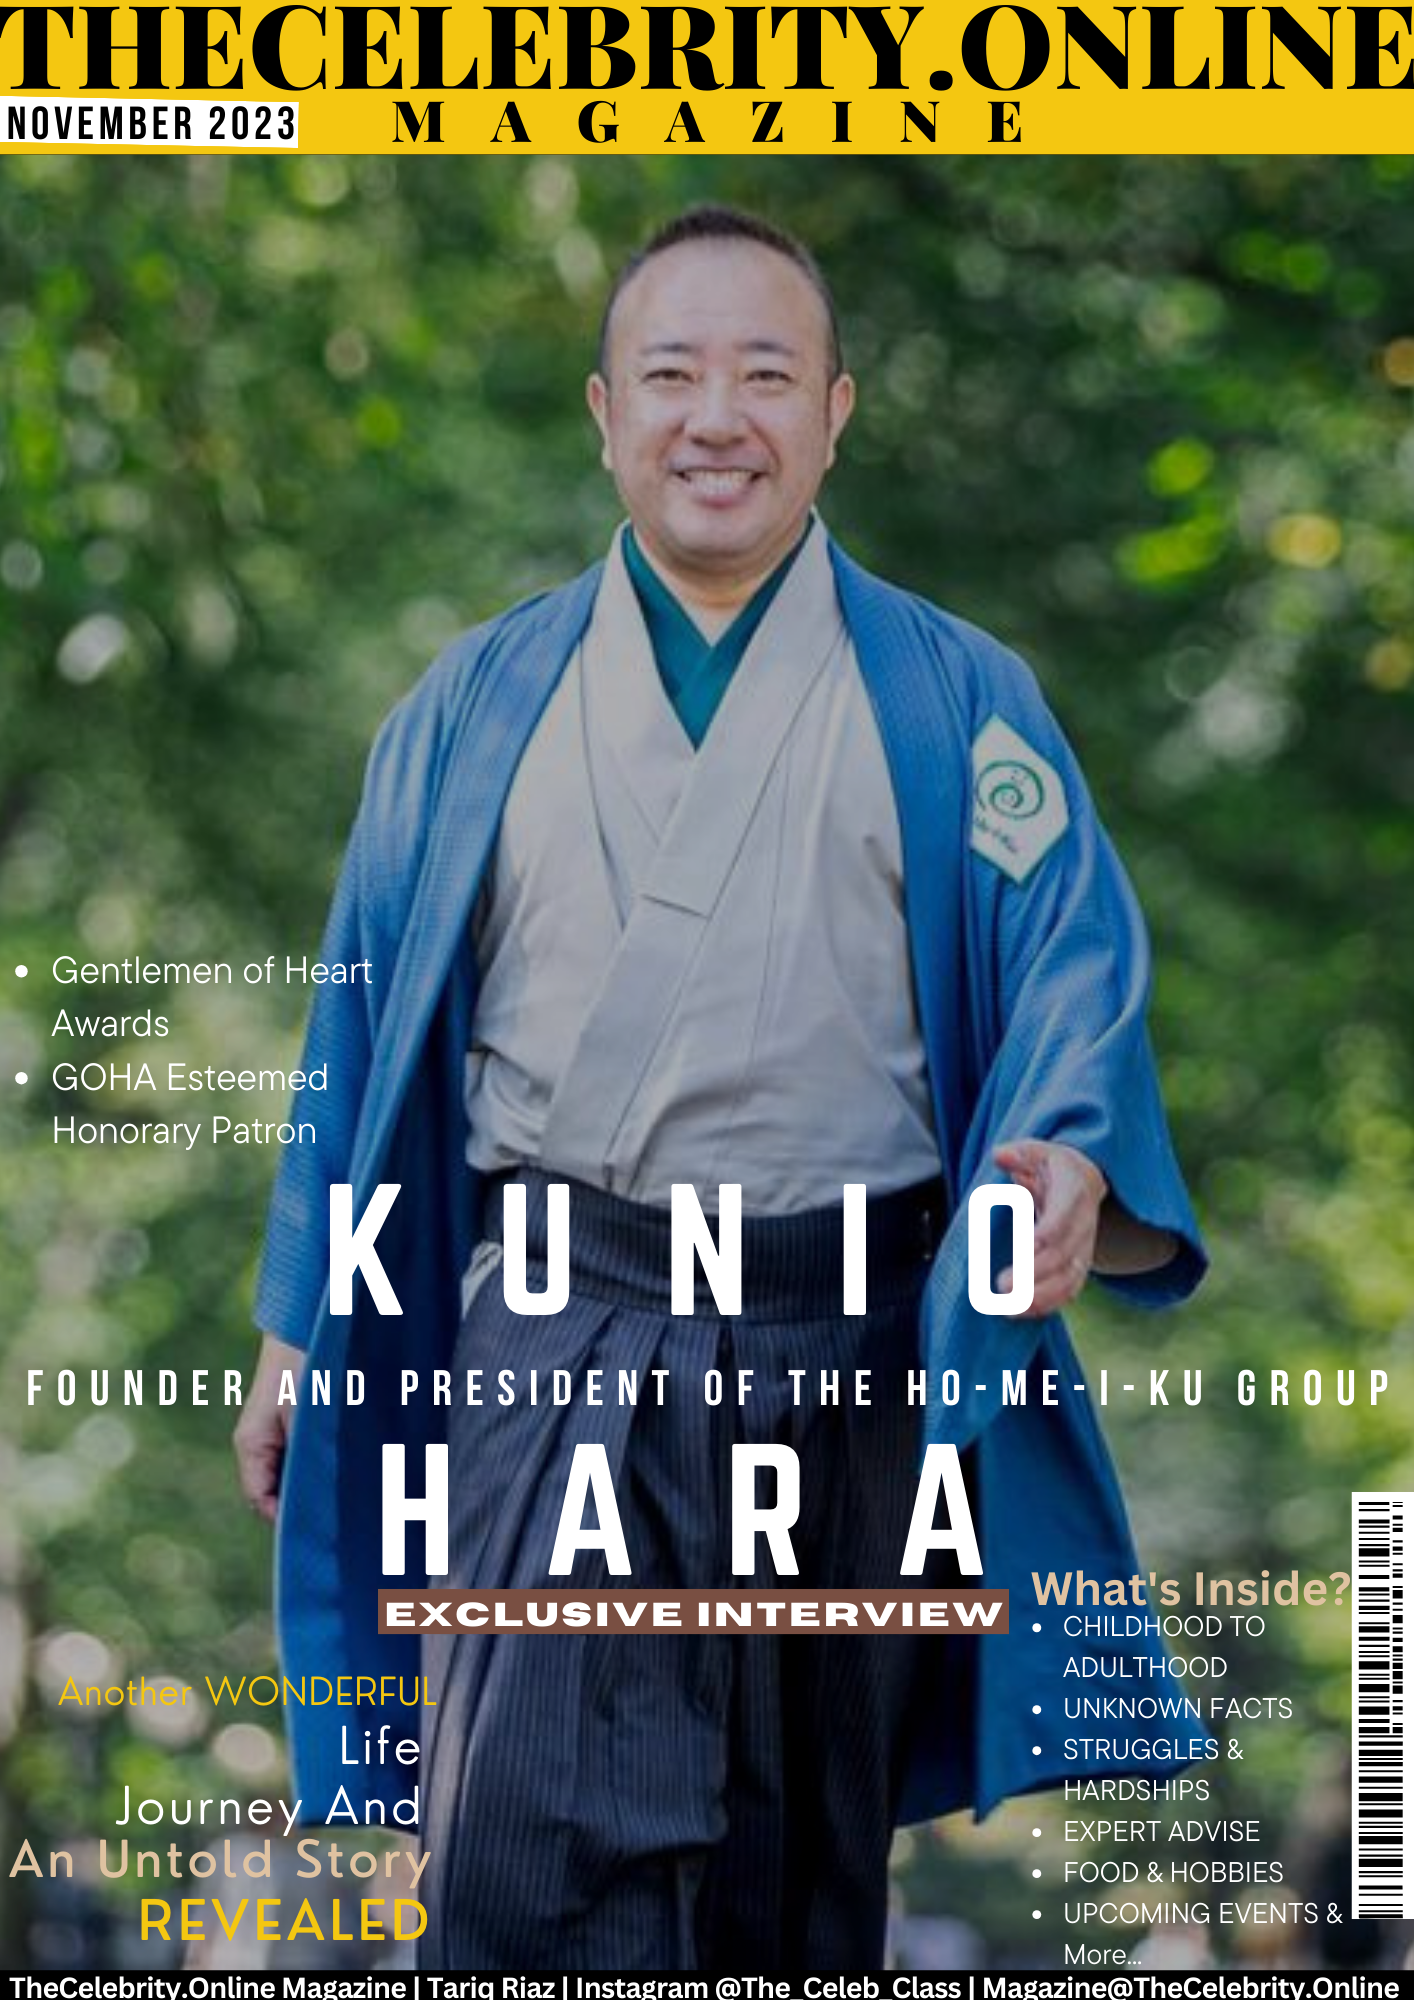 KUNIO HARA, Founder and President of the Ho-Me-I-Ku Group – Exclusive Interview